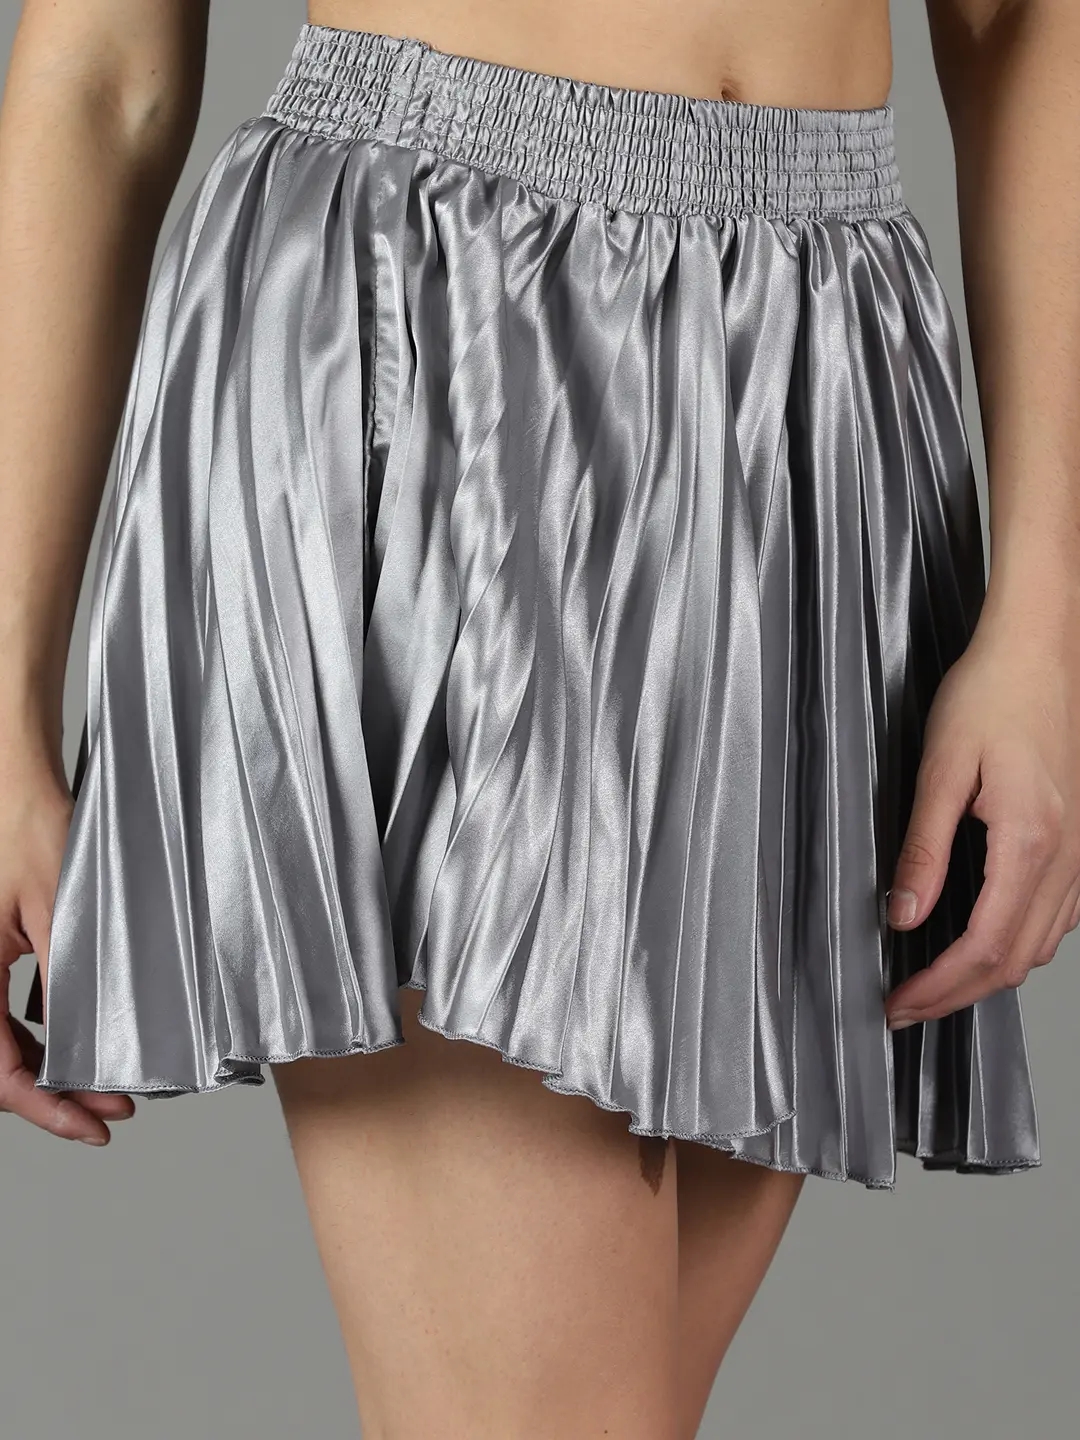 SHOWOFF Women's Solid Grey Satin Flared Skirt